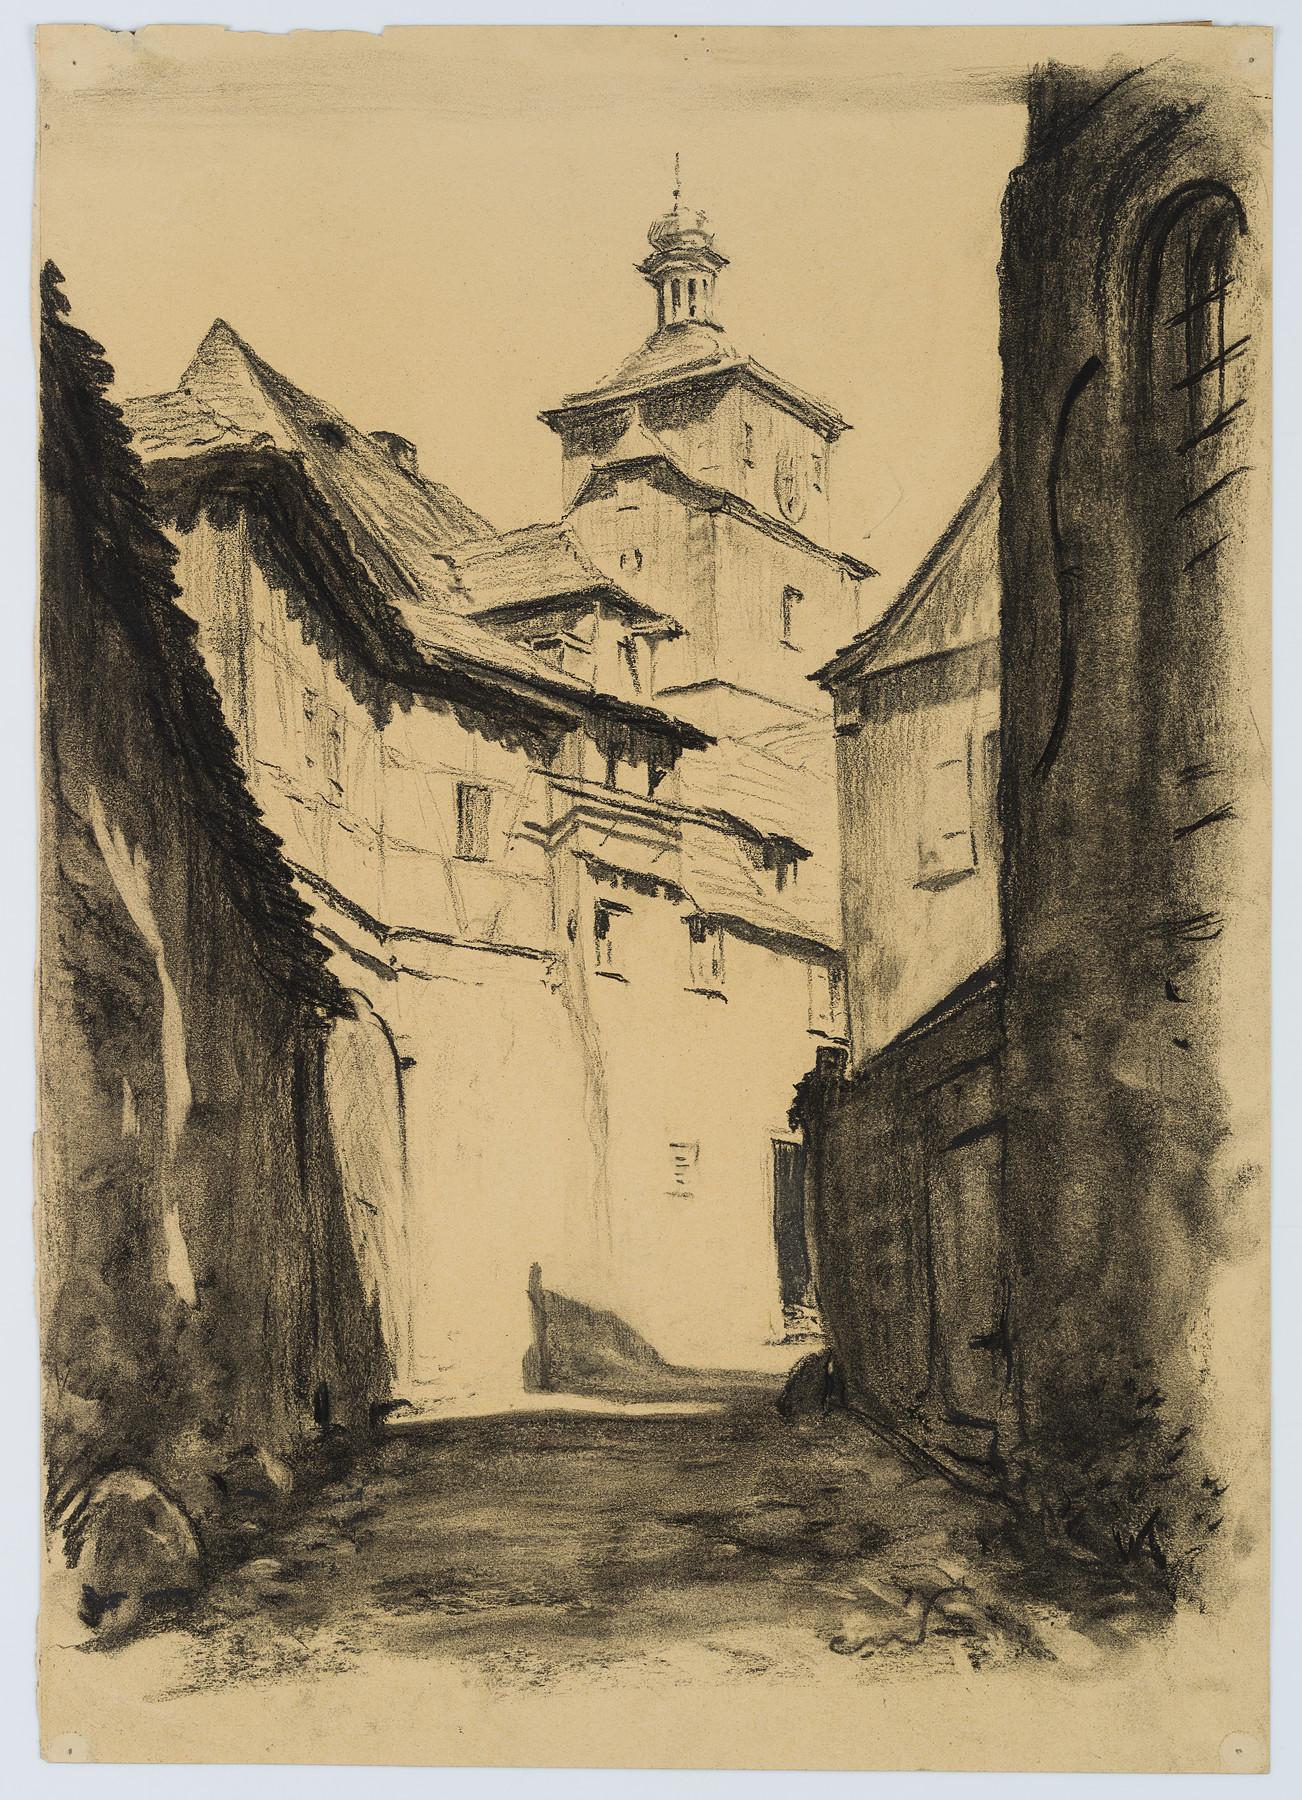 Alley in Rothenburg ob der Tauber with White Tower - Art by Carl August Walther